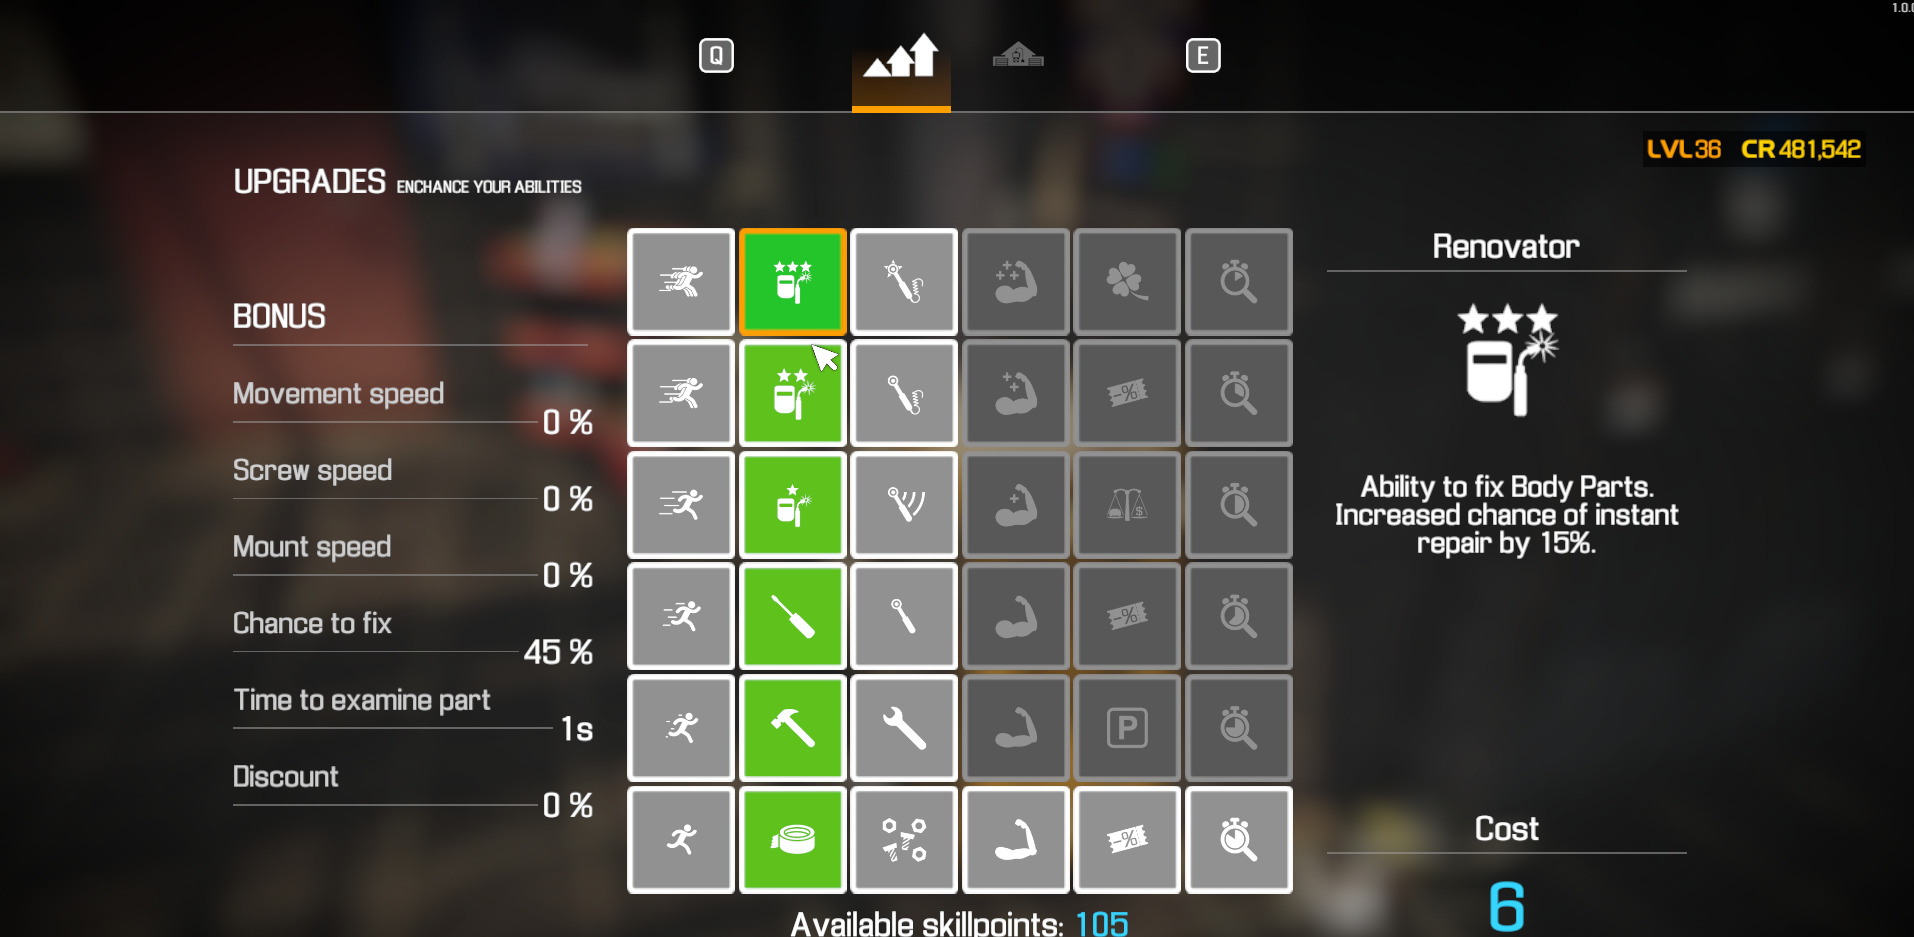 A screenshot showing the various upgrades that you can purchase to improve your abilities in Car Mechanic Simulator